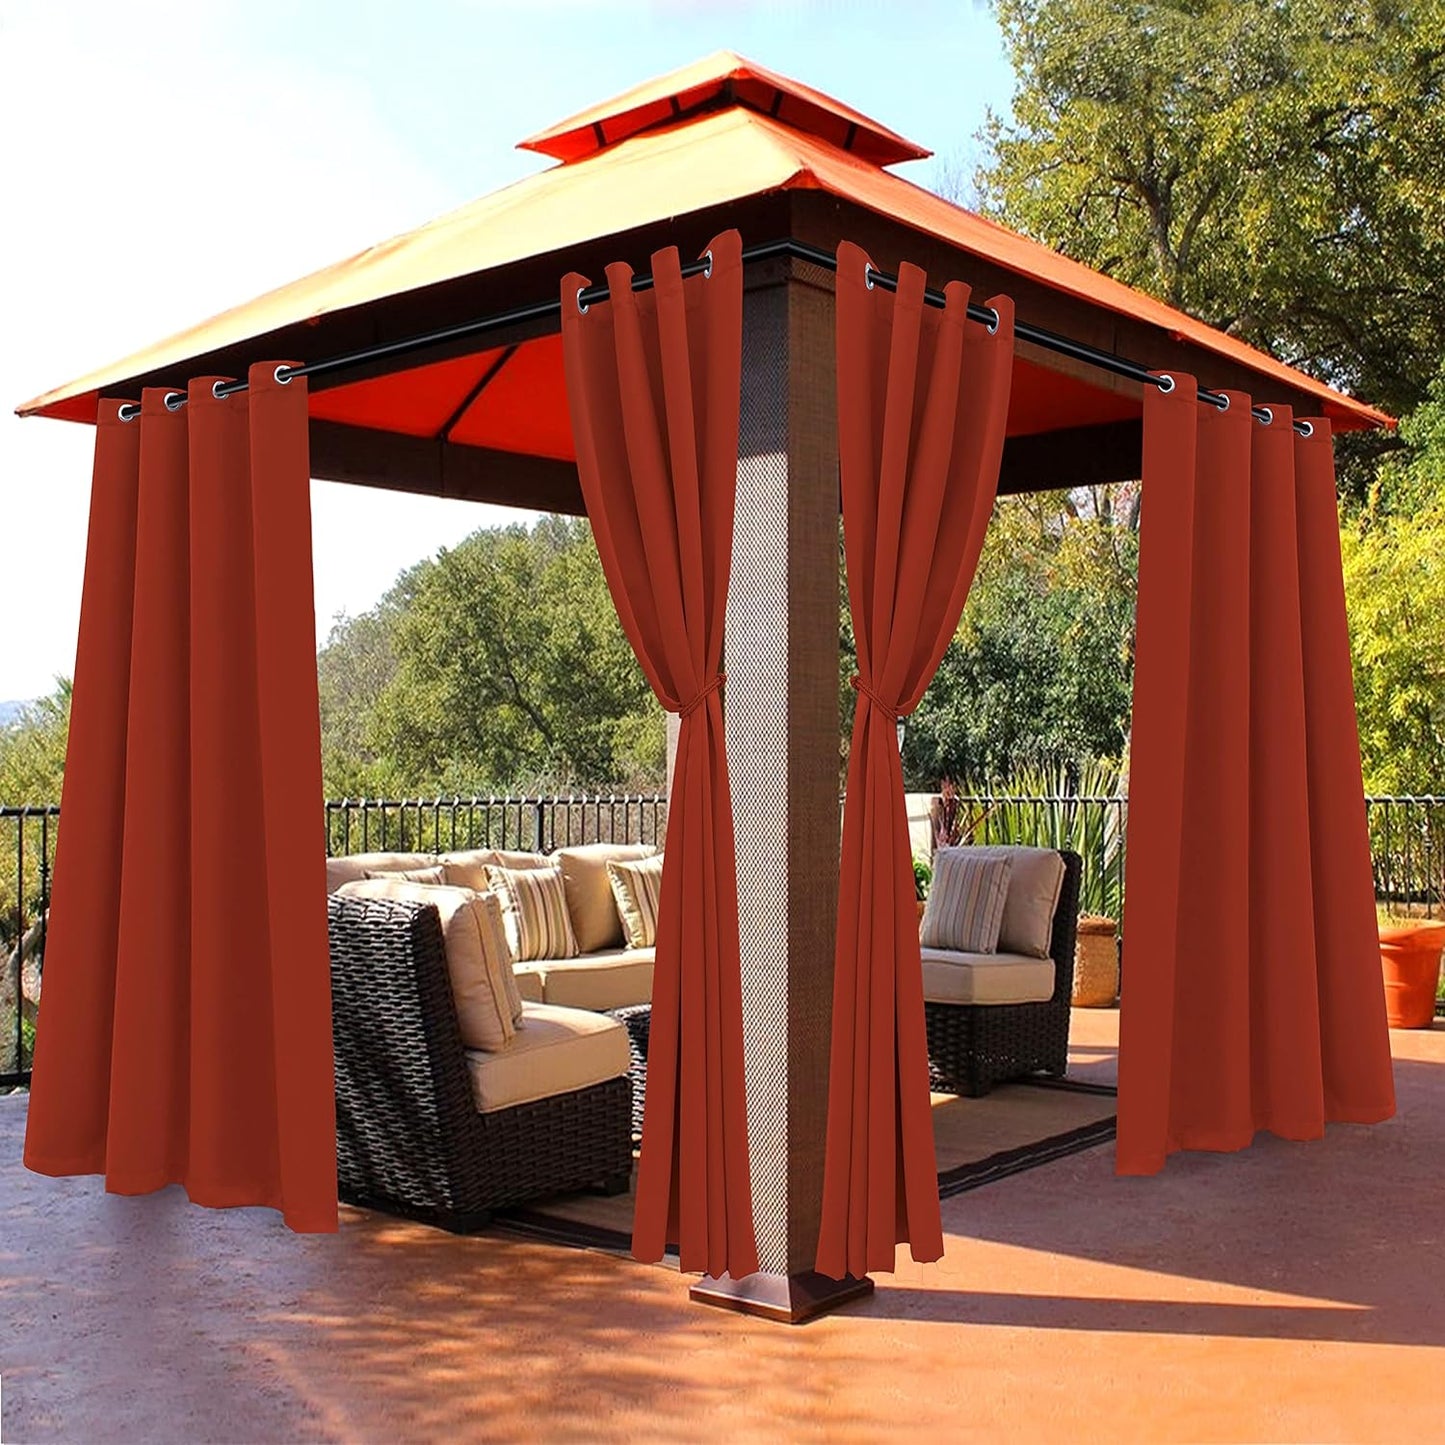 BONZER Outdoor Curtains for Patio Waterproof - Light Blocking Weather Resistant Privacy Grommet Blackout Curtains for Gazebo, Porch, Pergola, Cabana, Deck, Sunroom, 1 Panel, 52W X 84L Inch, Silver  BONZER Orange 52W X 108 Inch 